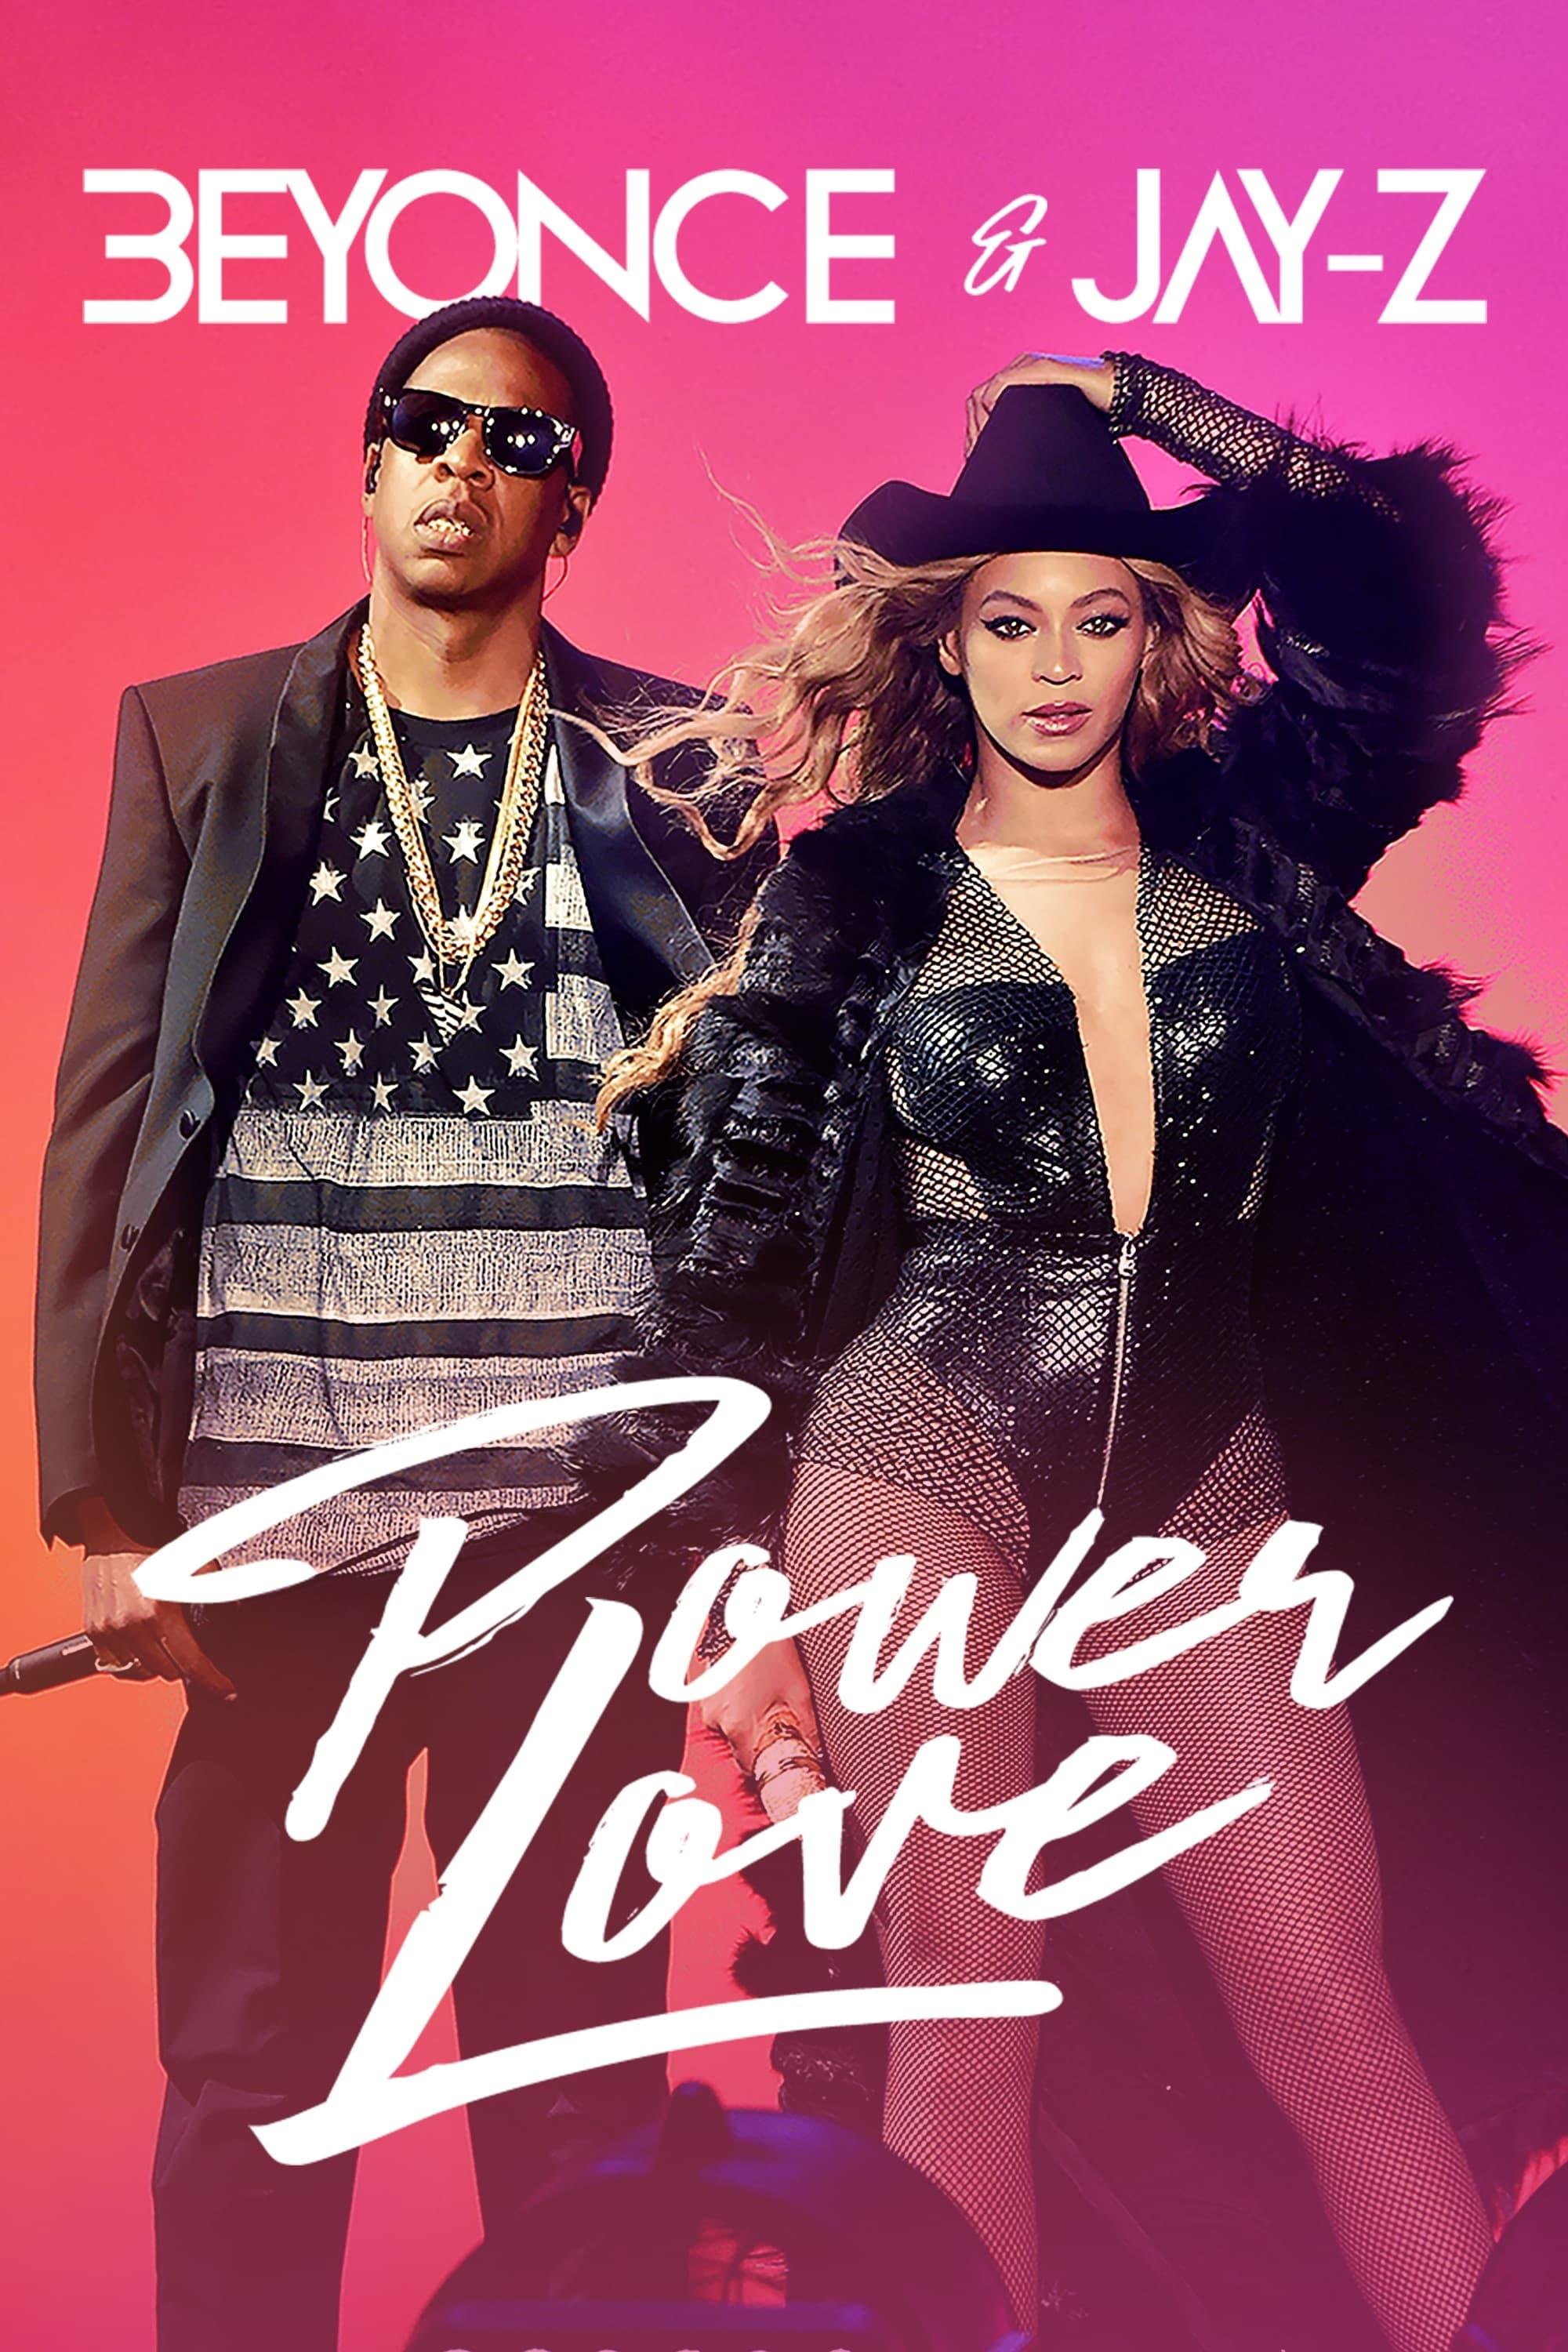 Beyonce & Jay-Z: Power Love poster